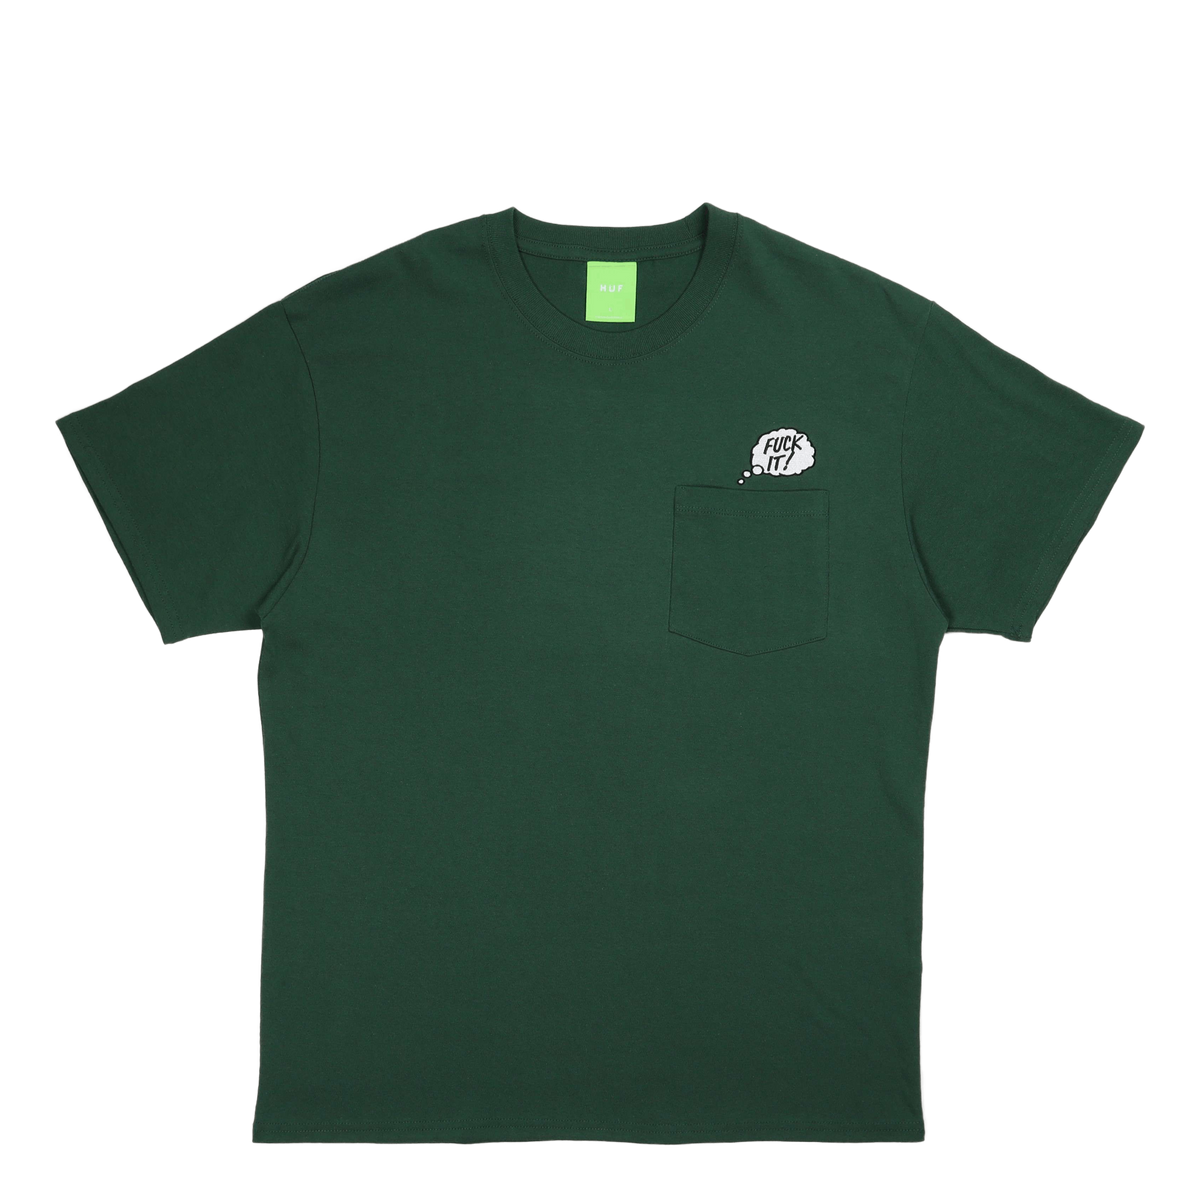 In The Pocket S/s Tee Forest Green